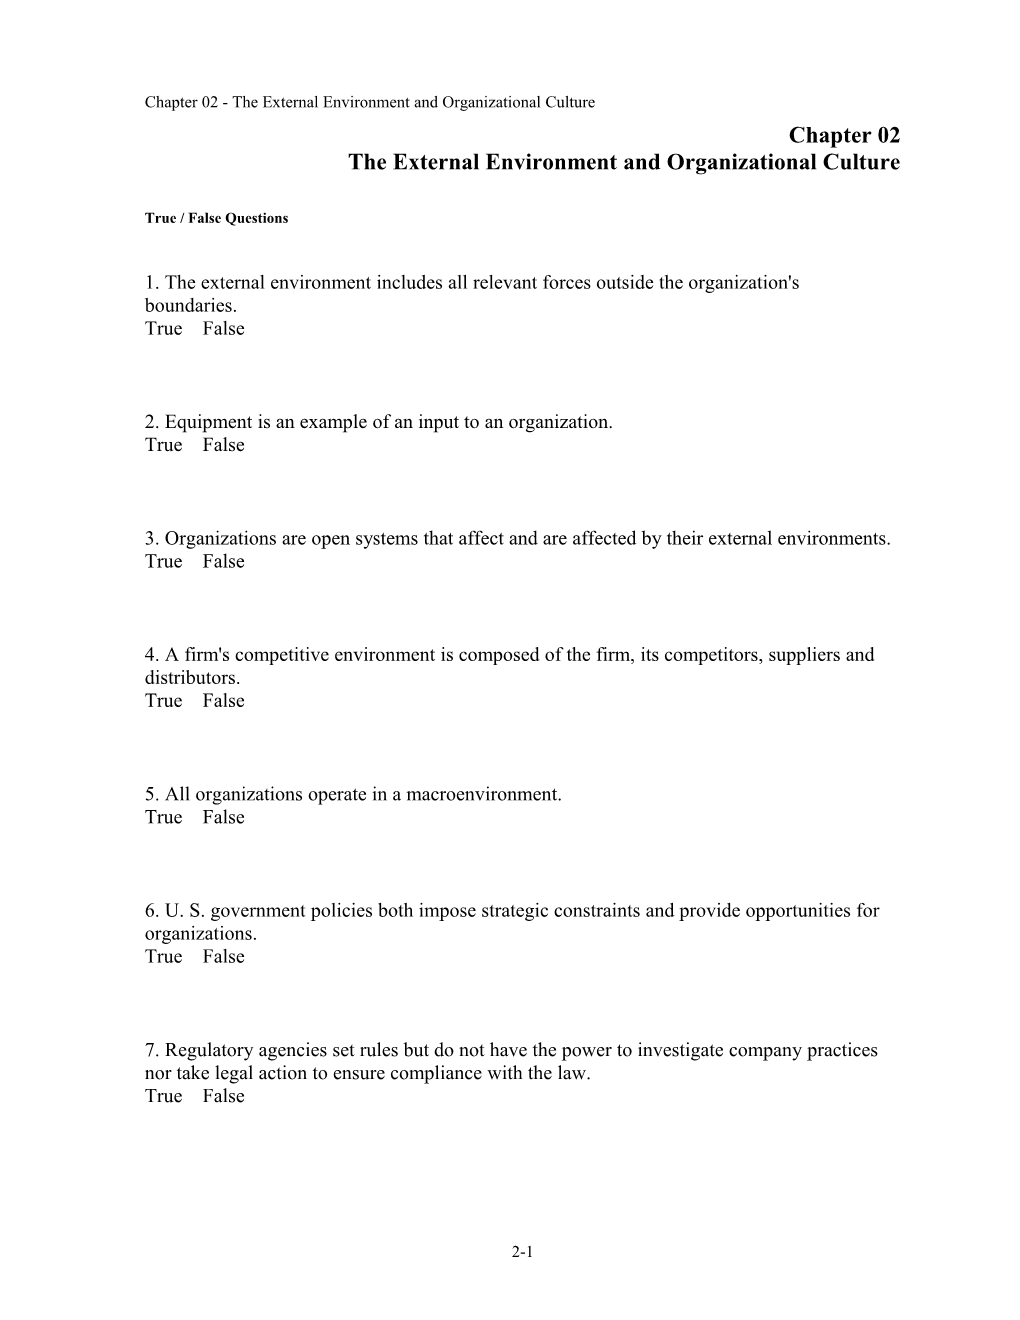 Chapter 02 The External Environment And Organizational Culture